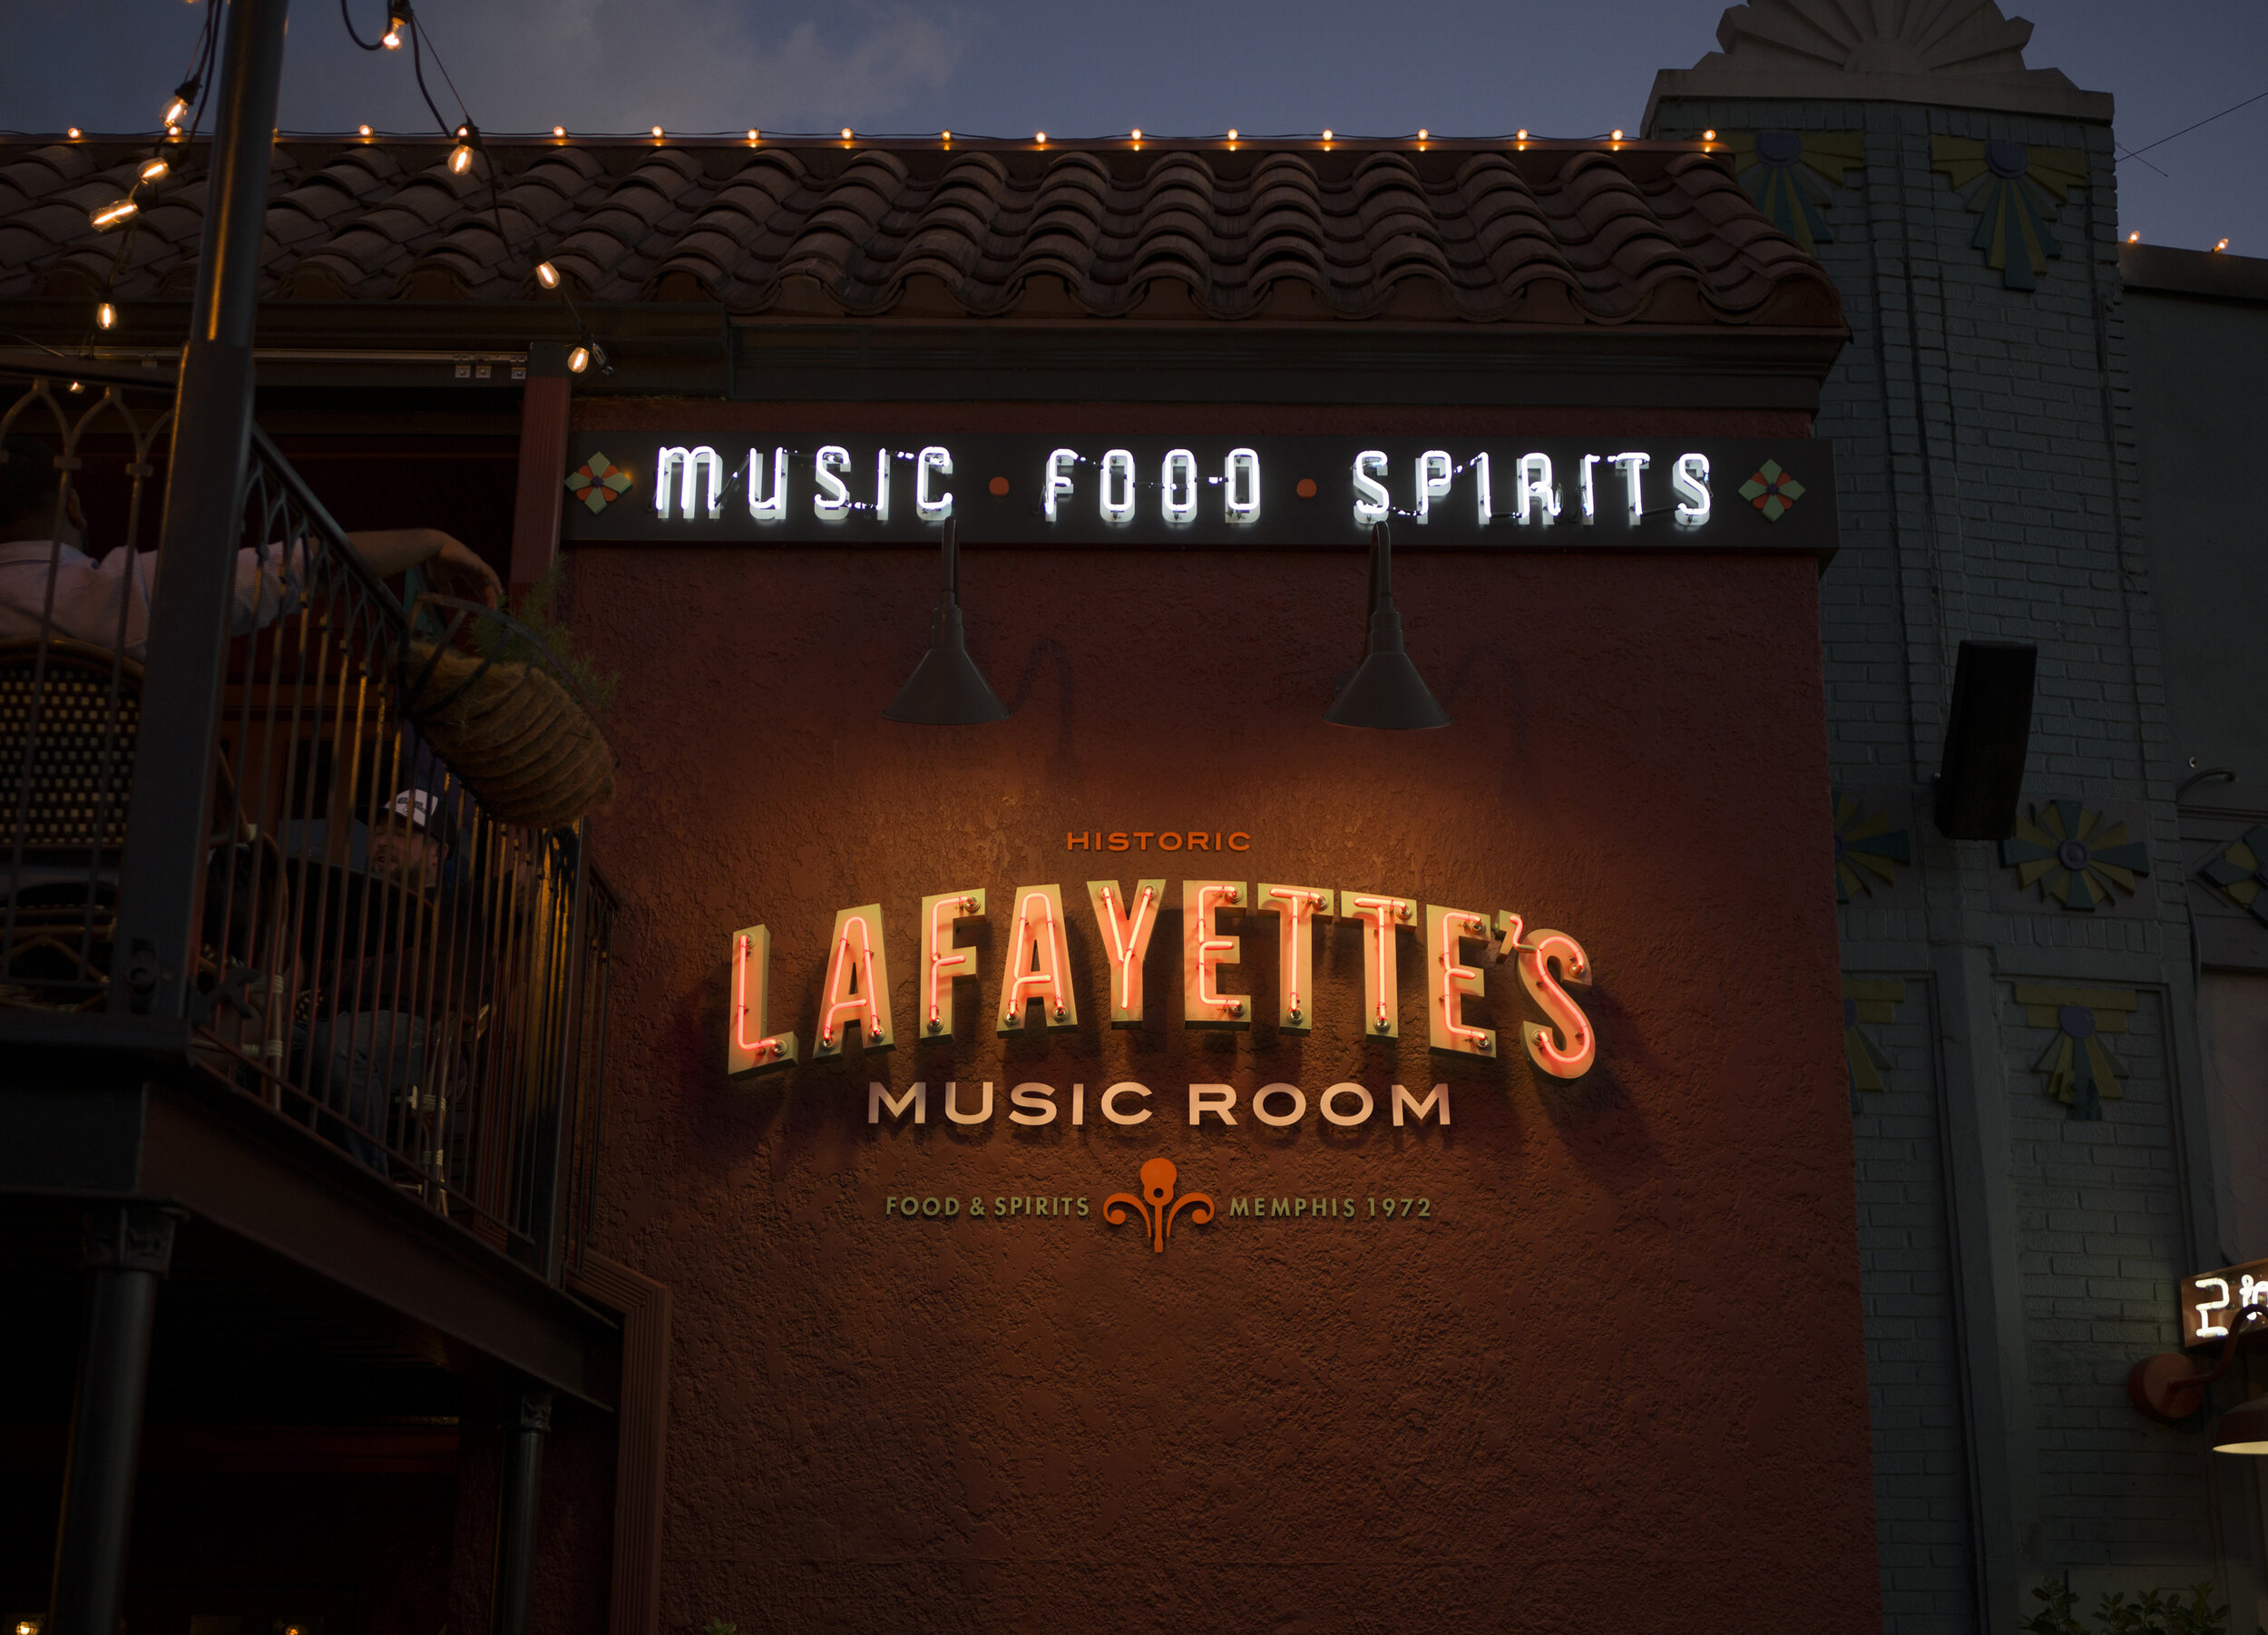  Lafayette’s Music Room exterior signage  Creative and design by Chuck Mitchell  Overton Square Memphis, Tennessee  Photograph by Reid Mitchell  Sign fabrication and installation by Frank Balton Sign Company 